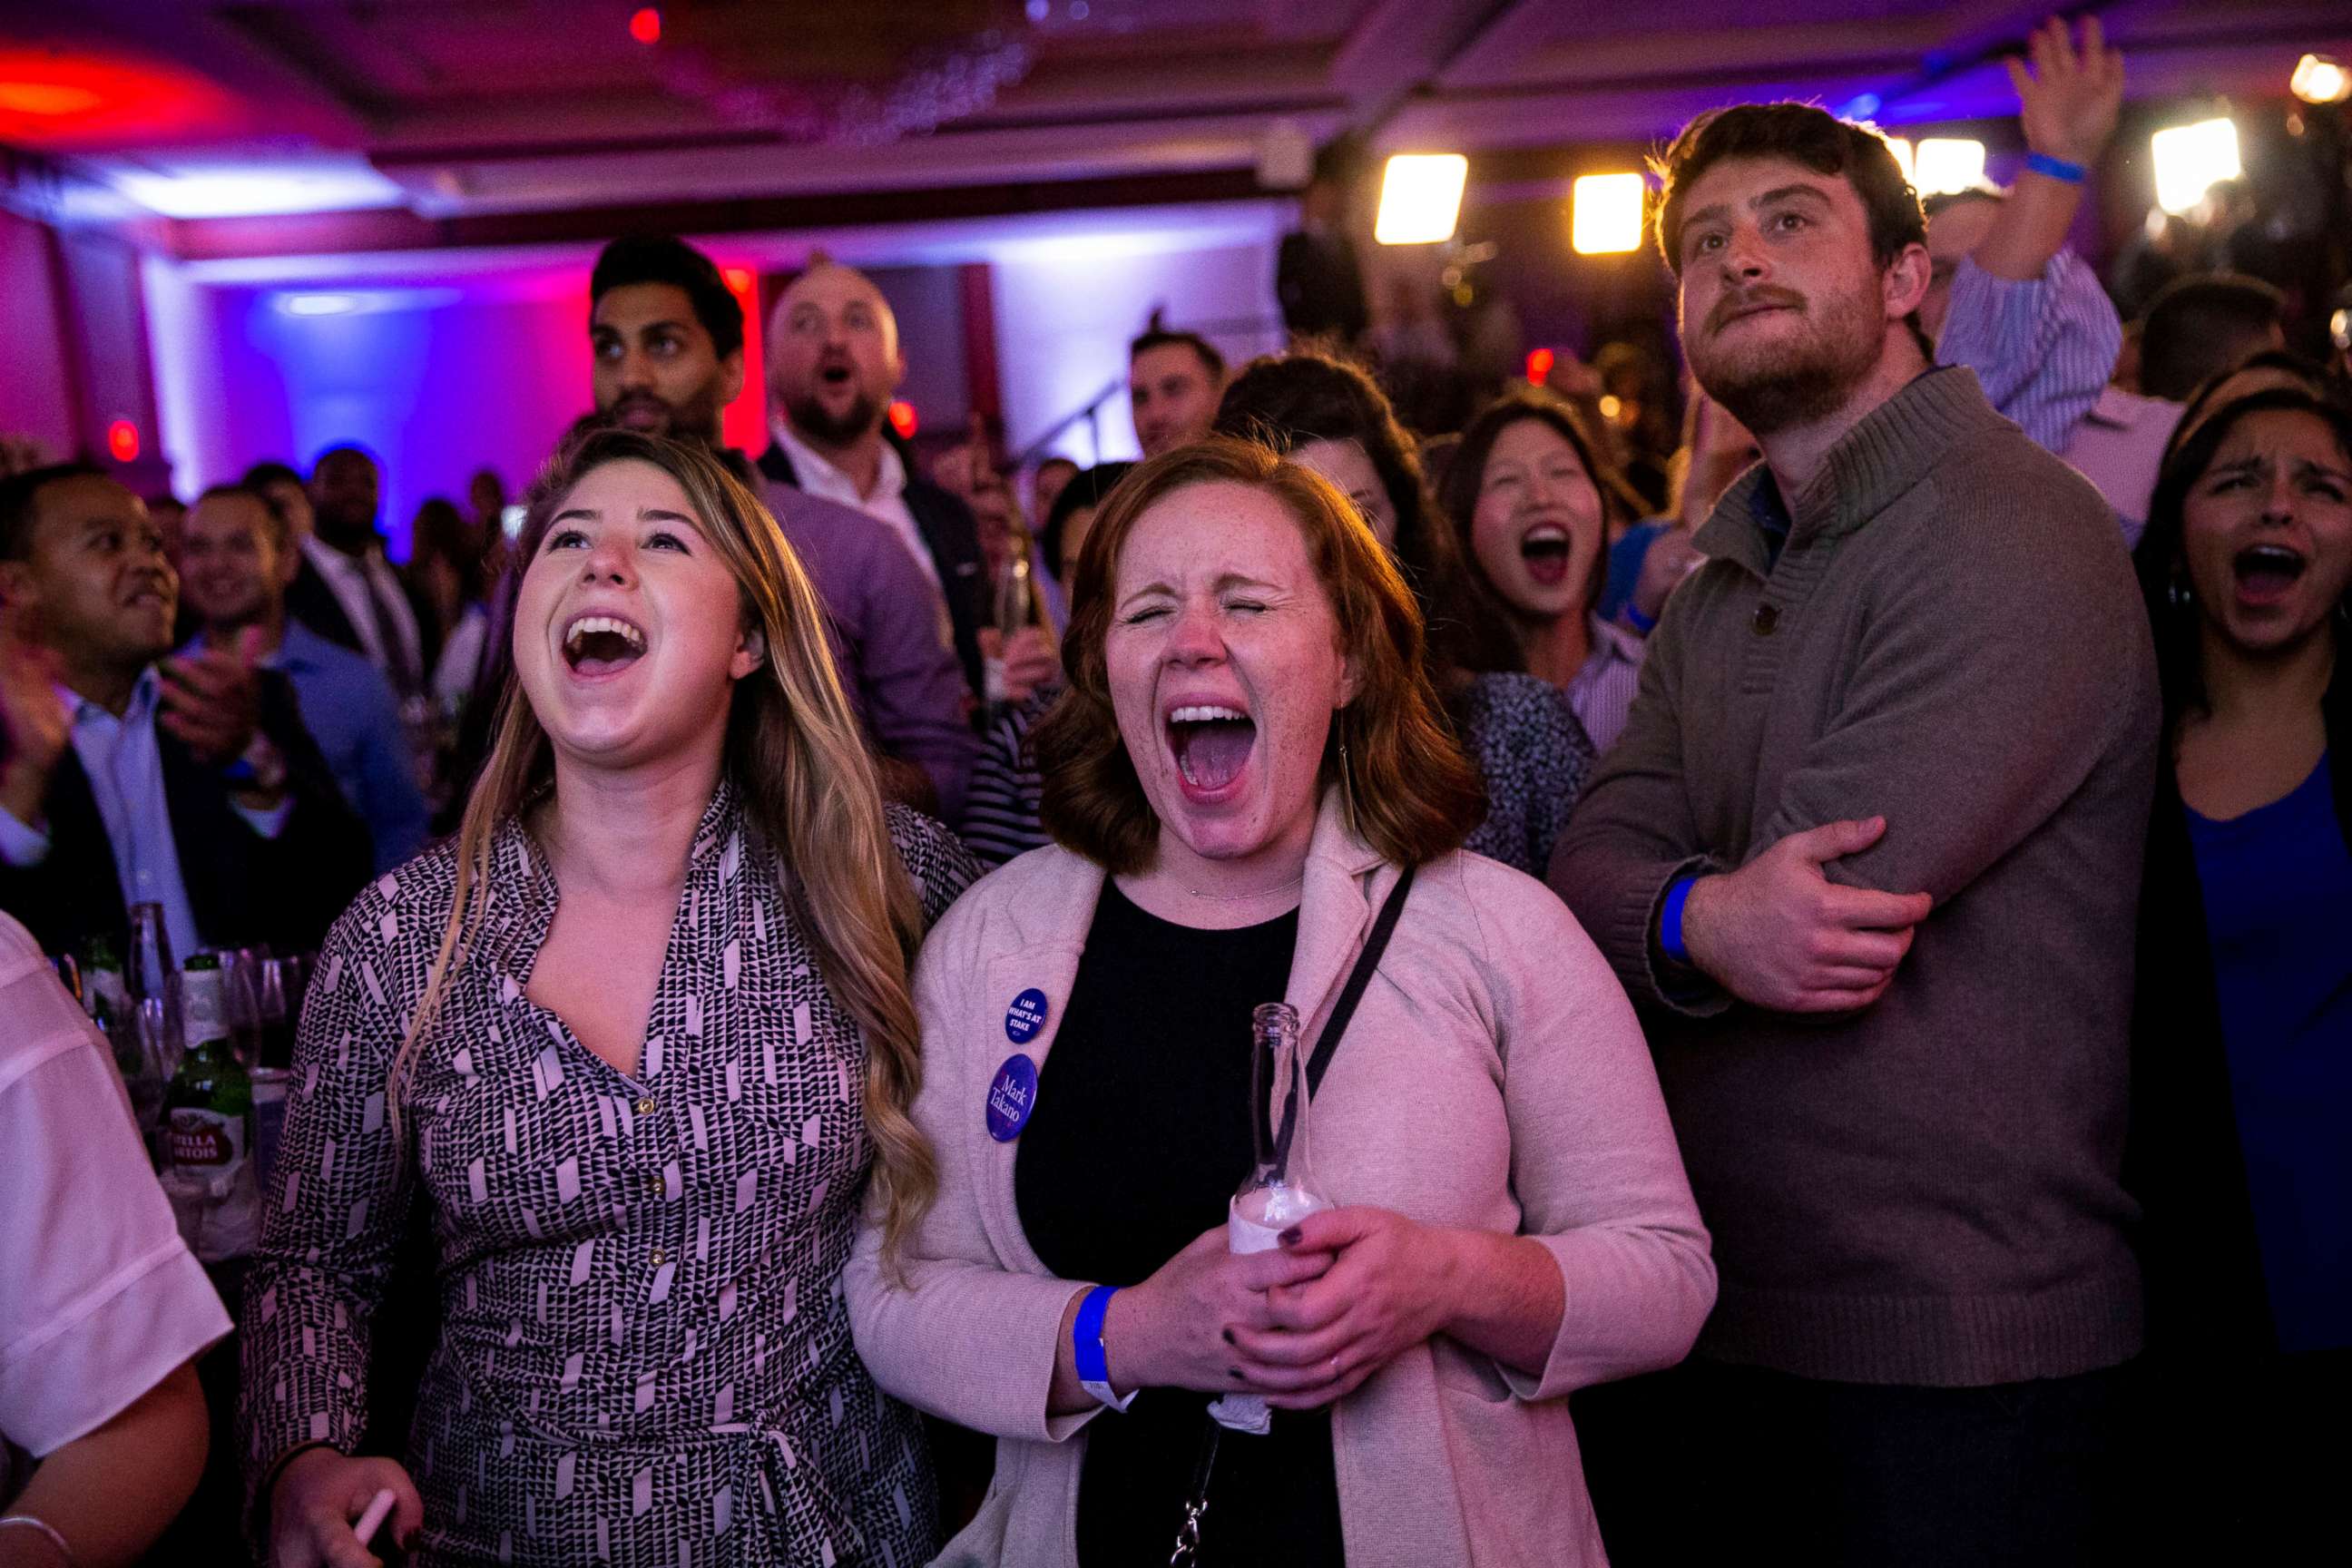 PHOTO: Alyssa Giammarella and Claire Viall cheer as they watch election results come in at a Democratic election night rally in Washington, Nov. 6, 2018.